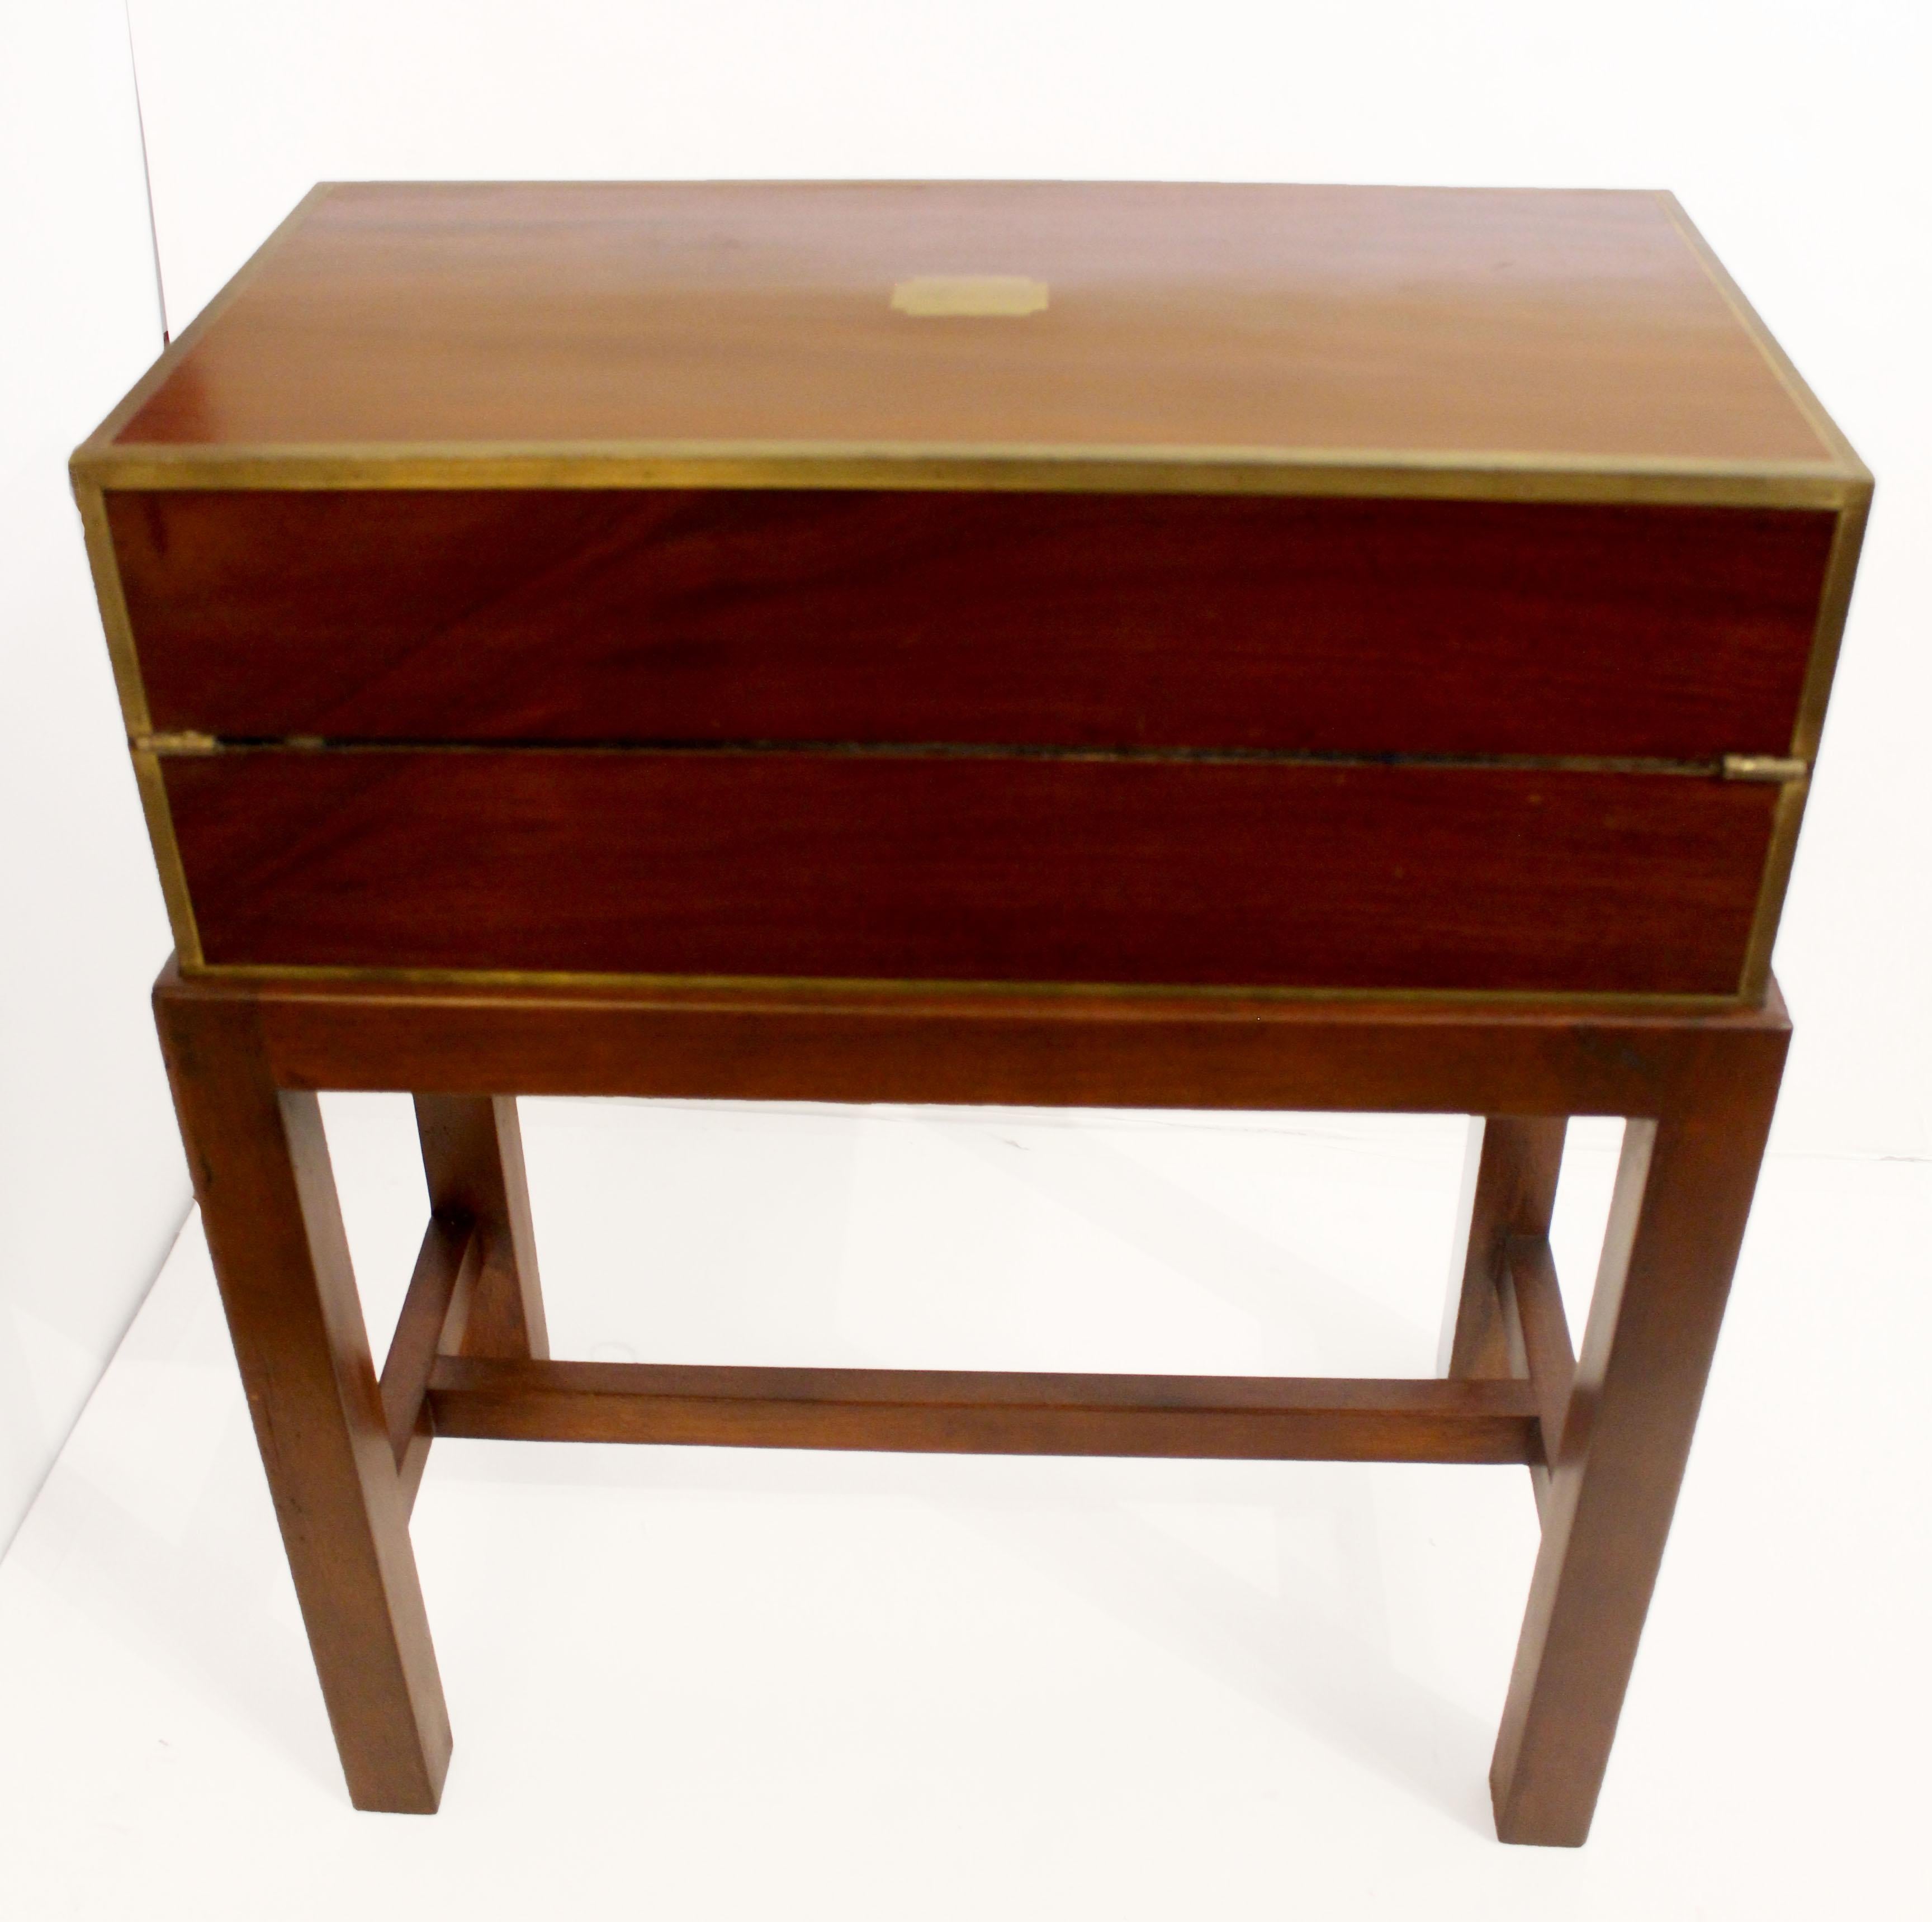 Circa 1860 English Lap Desk on Custom-Made Side Table Stand For Sale 7